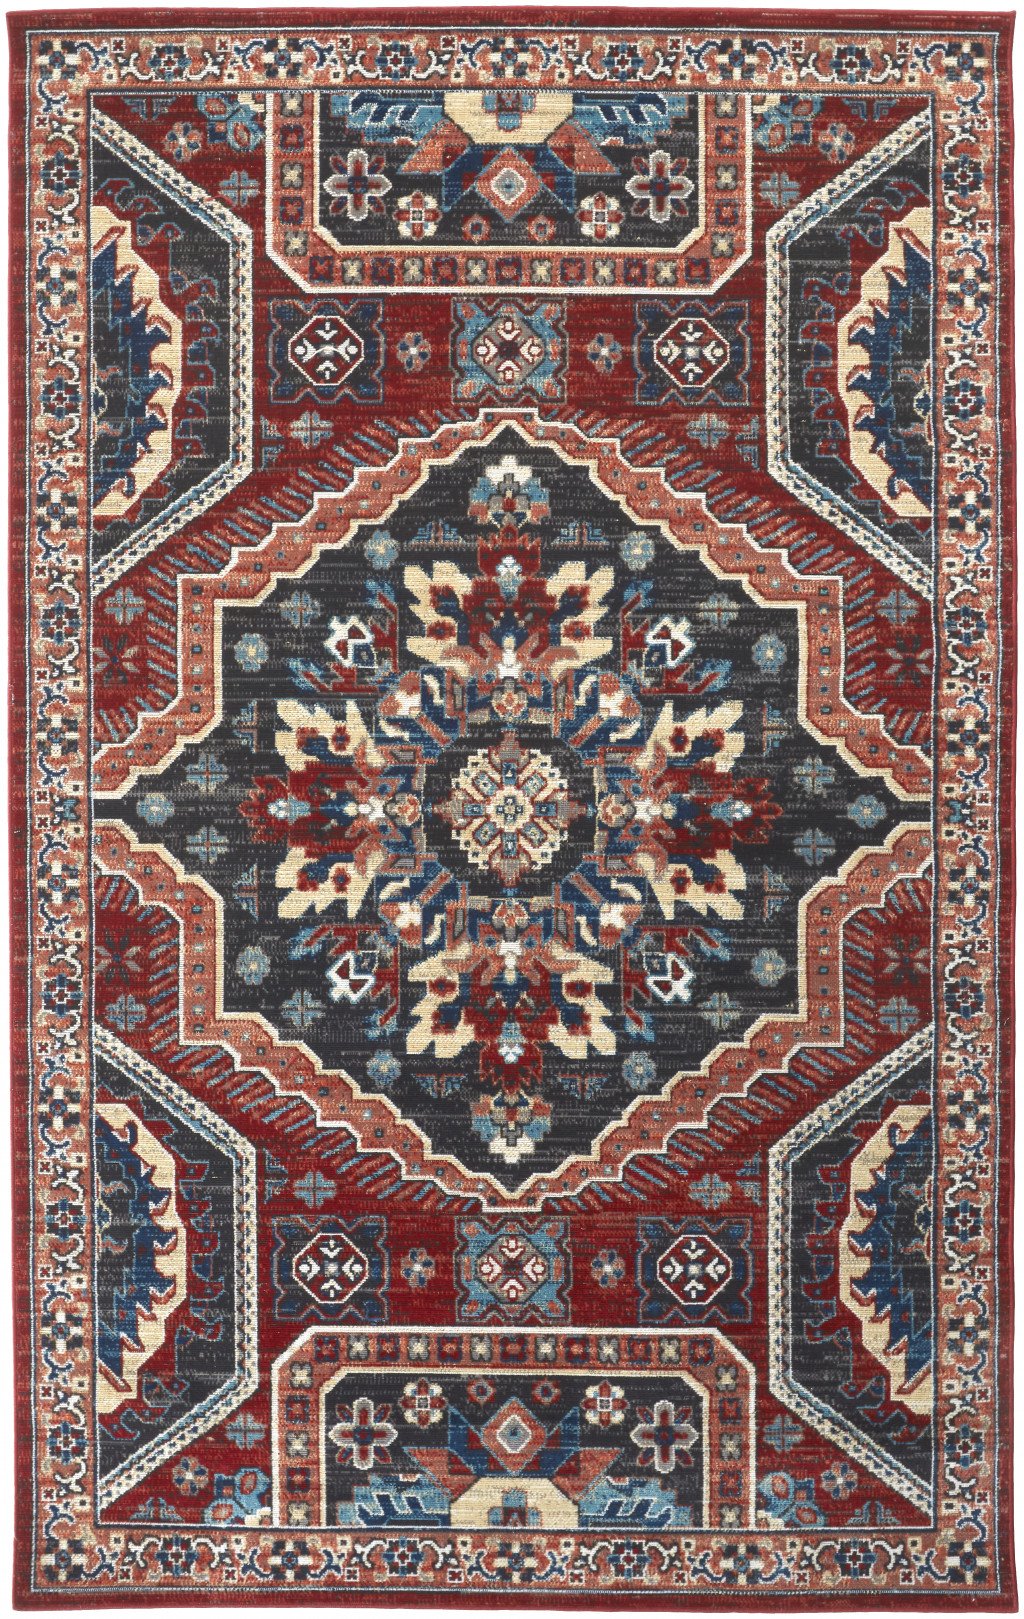 10' X 13' Red Gray And Tan Abstract Power Loom Distressed Stain Resistant Area Rug-514677-1